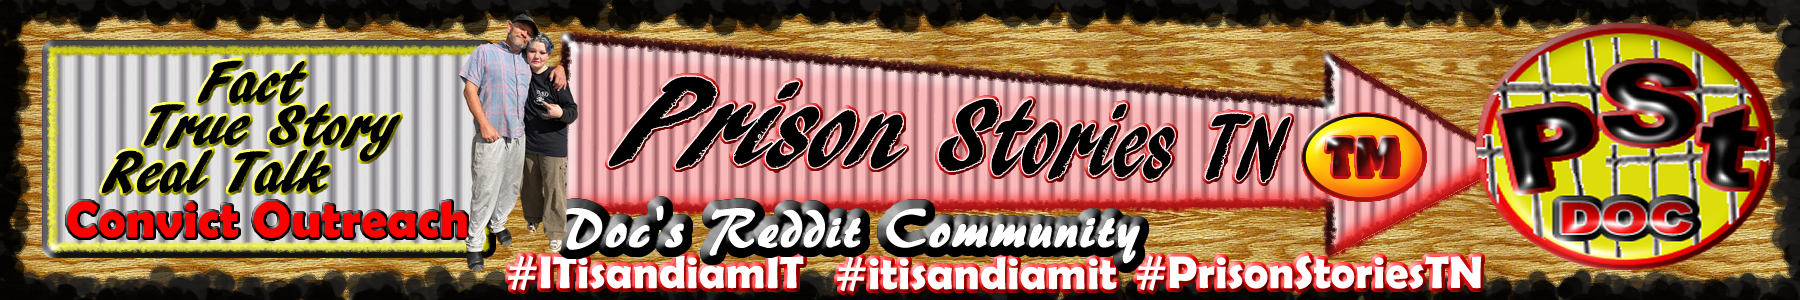 r/Prison_Stories_TN is Docs Reddit Community and where He share His Prison Stories